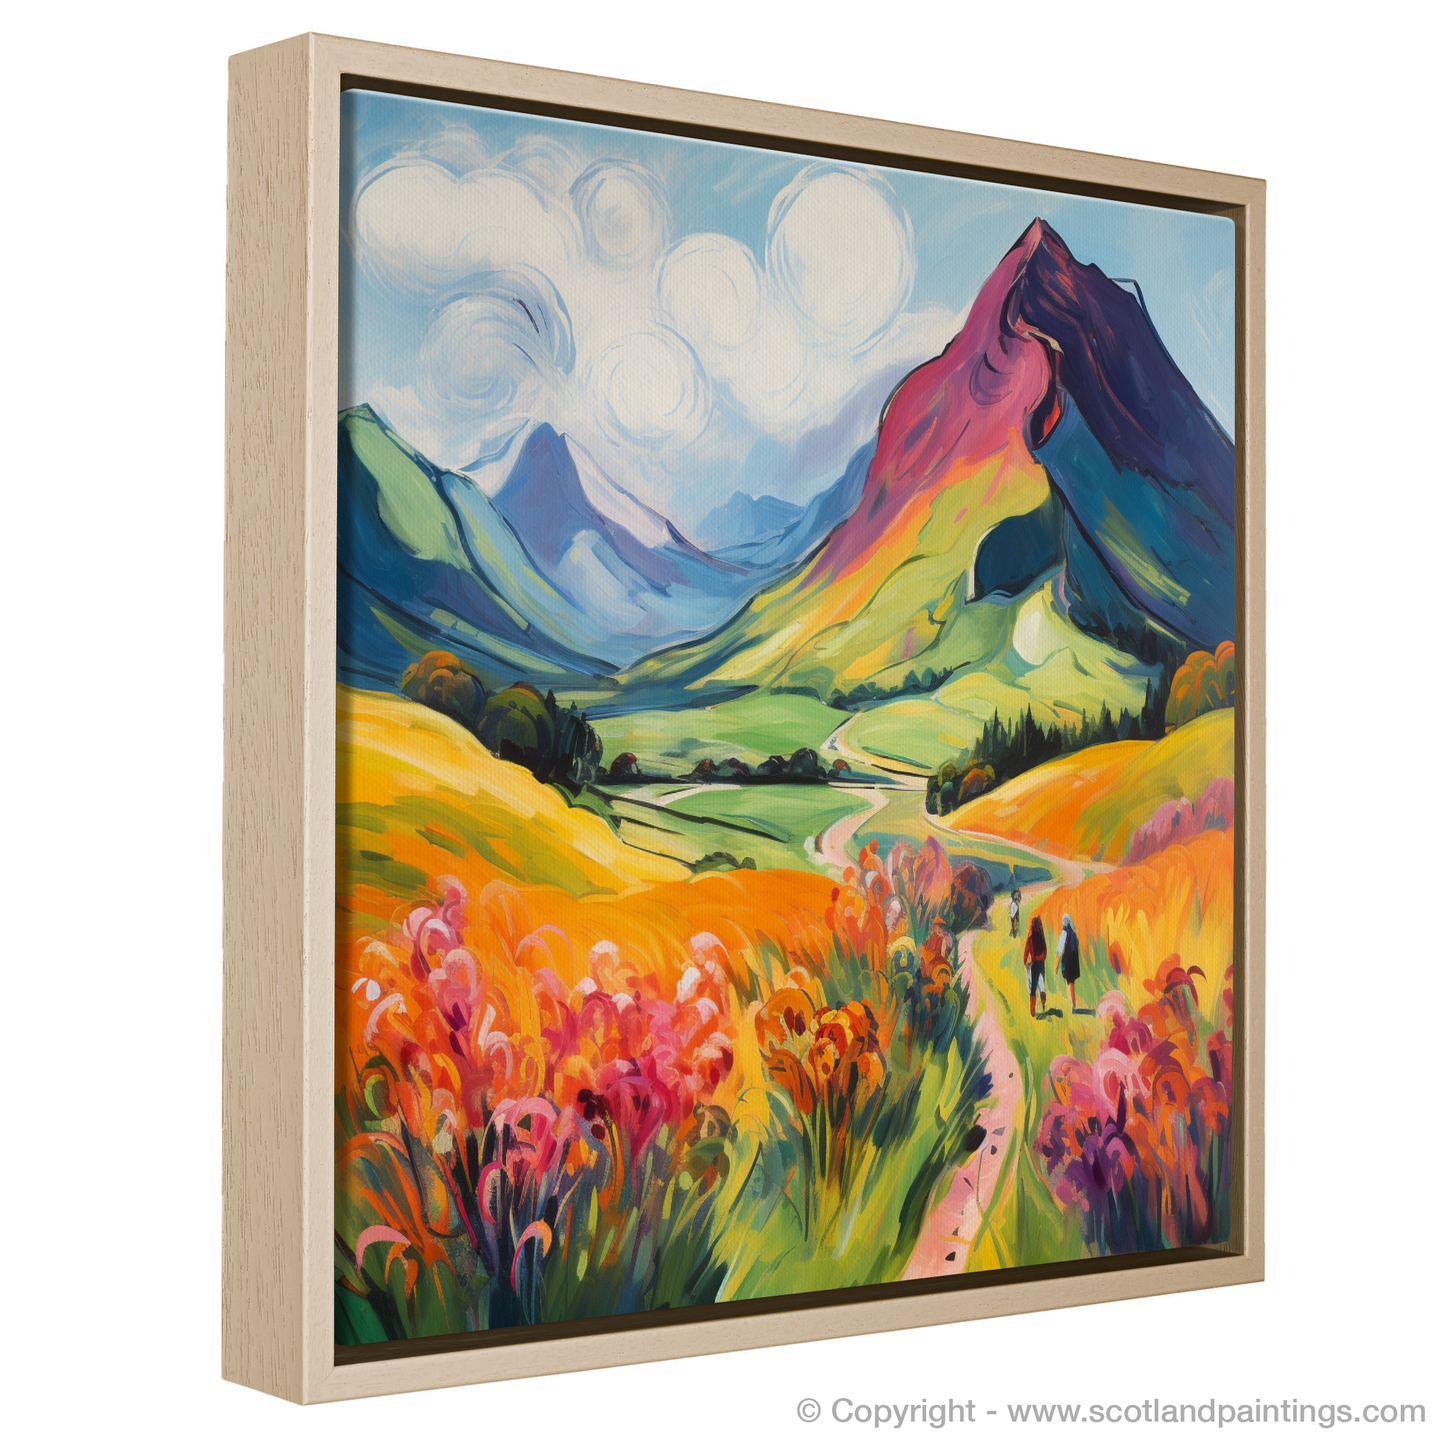 Painting and Art Print of Walkers in Glencoe during summer entitled "Summer Splendour in Glencoe: A Fauvist Ode to the Scottish Highlands".